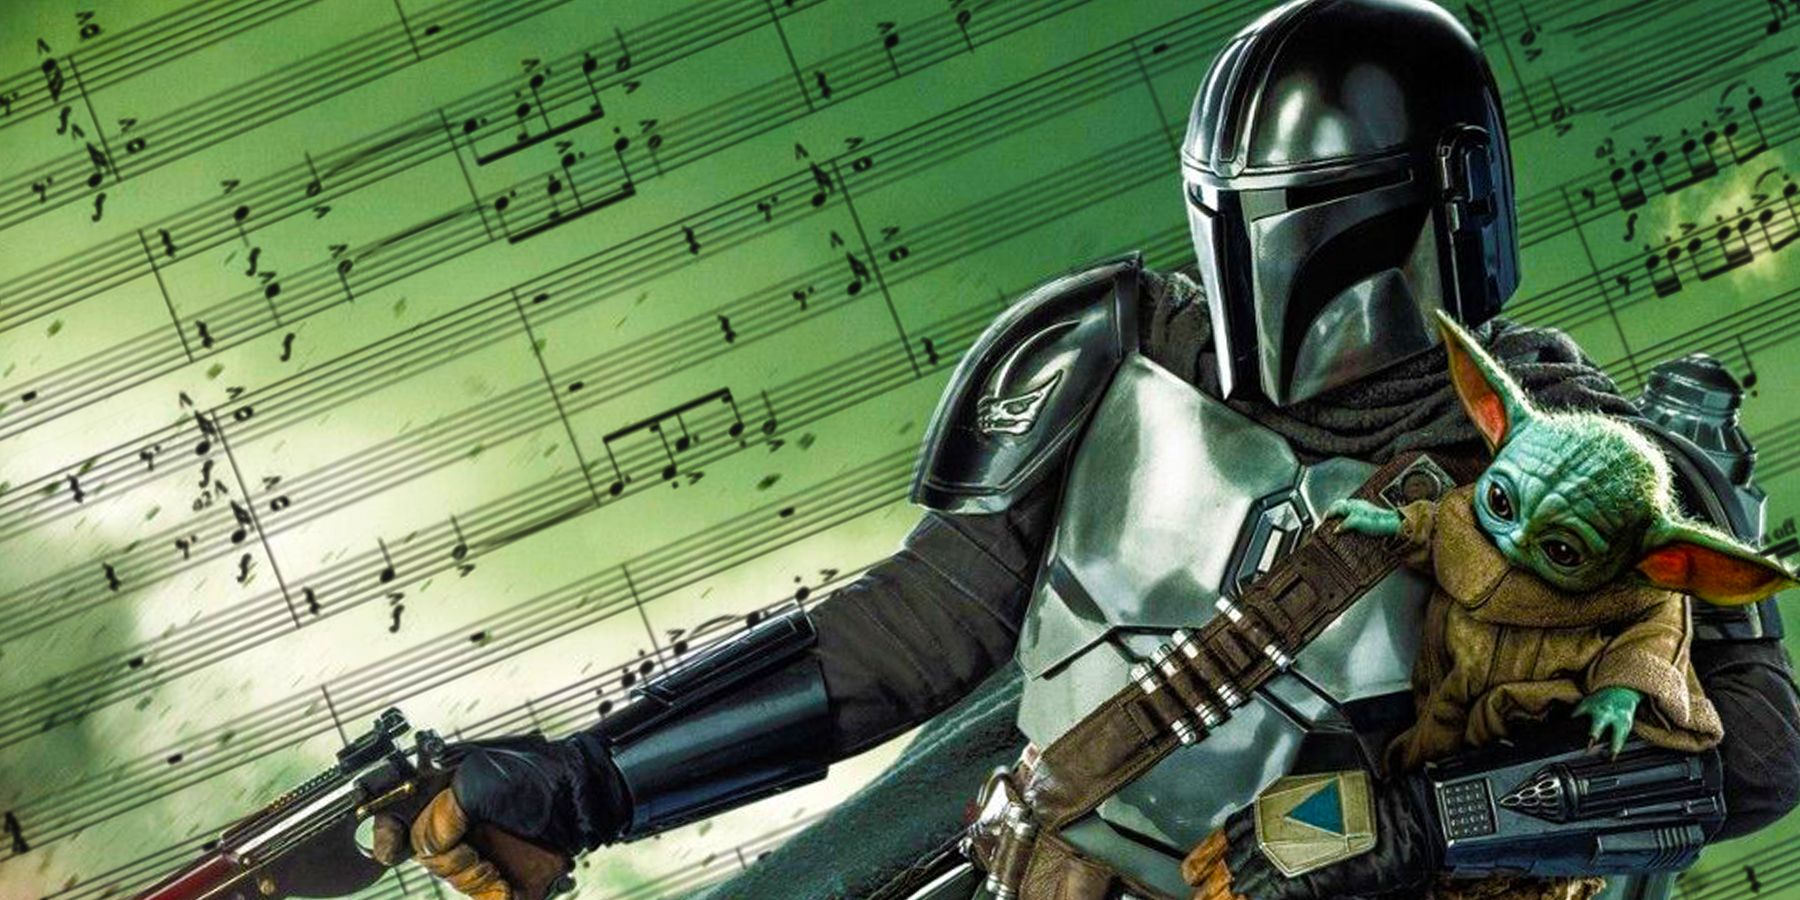 On the right, Din Djarin is seen holding Grogu and flying while wielding a blaster. Behind Din, the sheet music for the Mandalorian theme floats.